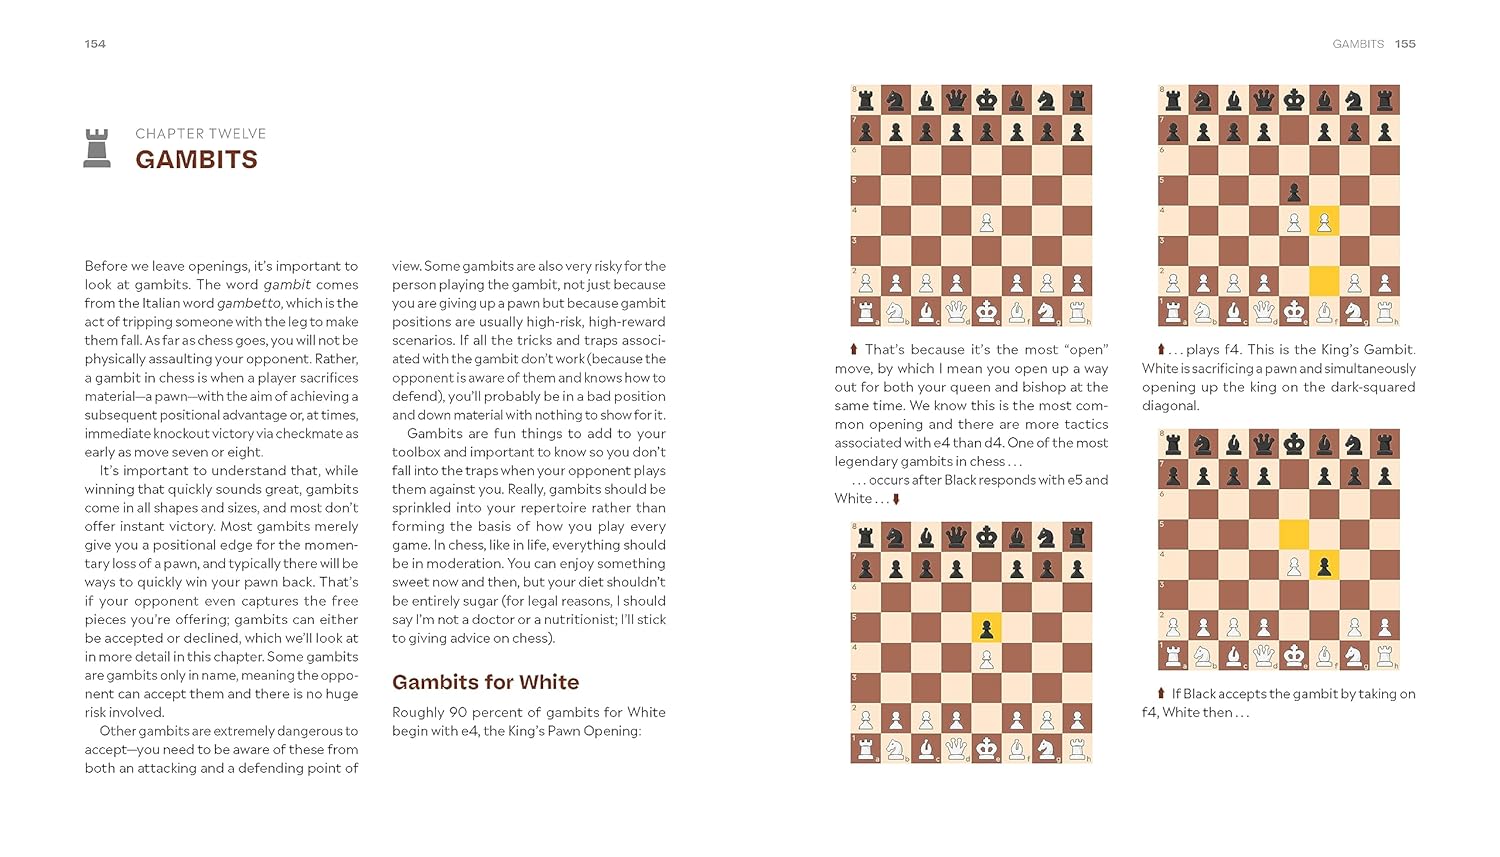 How to Win at Chess: The Ultimate Guide for Beginners and Beyond Hardcover